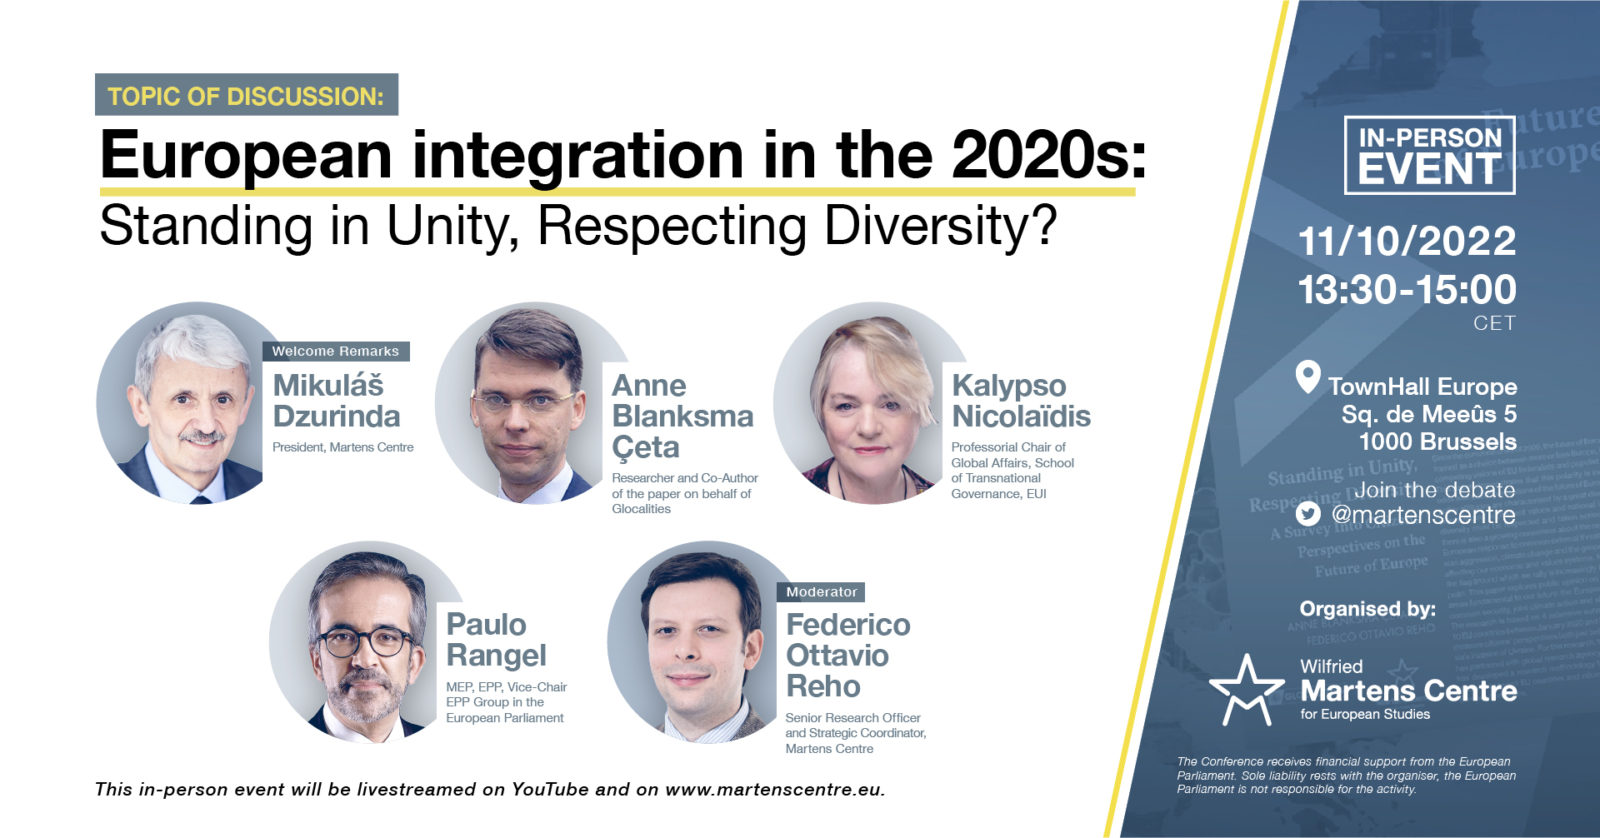 European integration in the 2020s: Standing in Unity, Respecting Diversity?